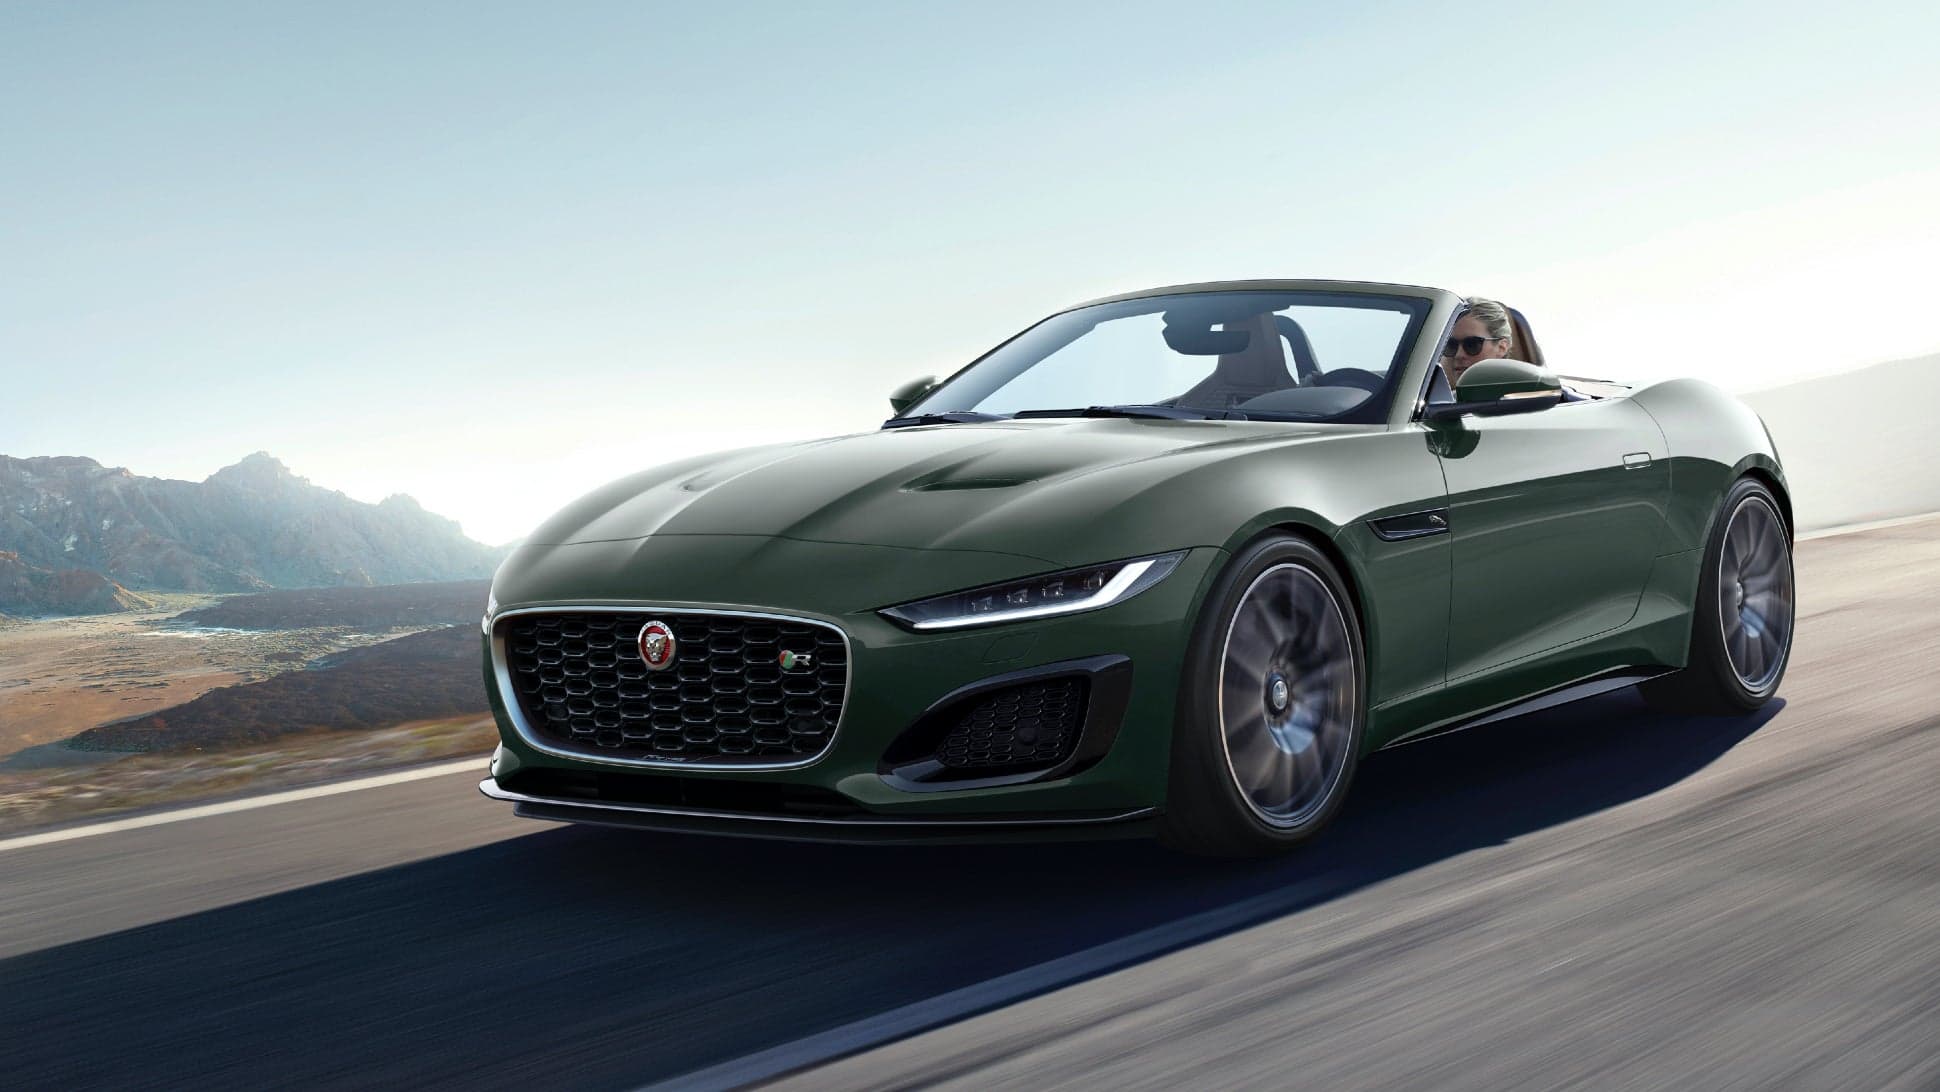 The 2021 Jaguar F-Type Heritage 60 Is a Glorious Celebration of the E-Type’s 60th Birthday